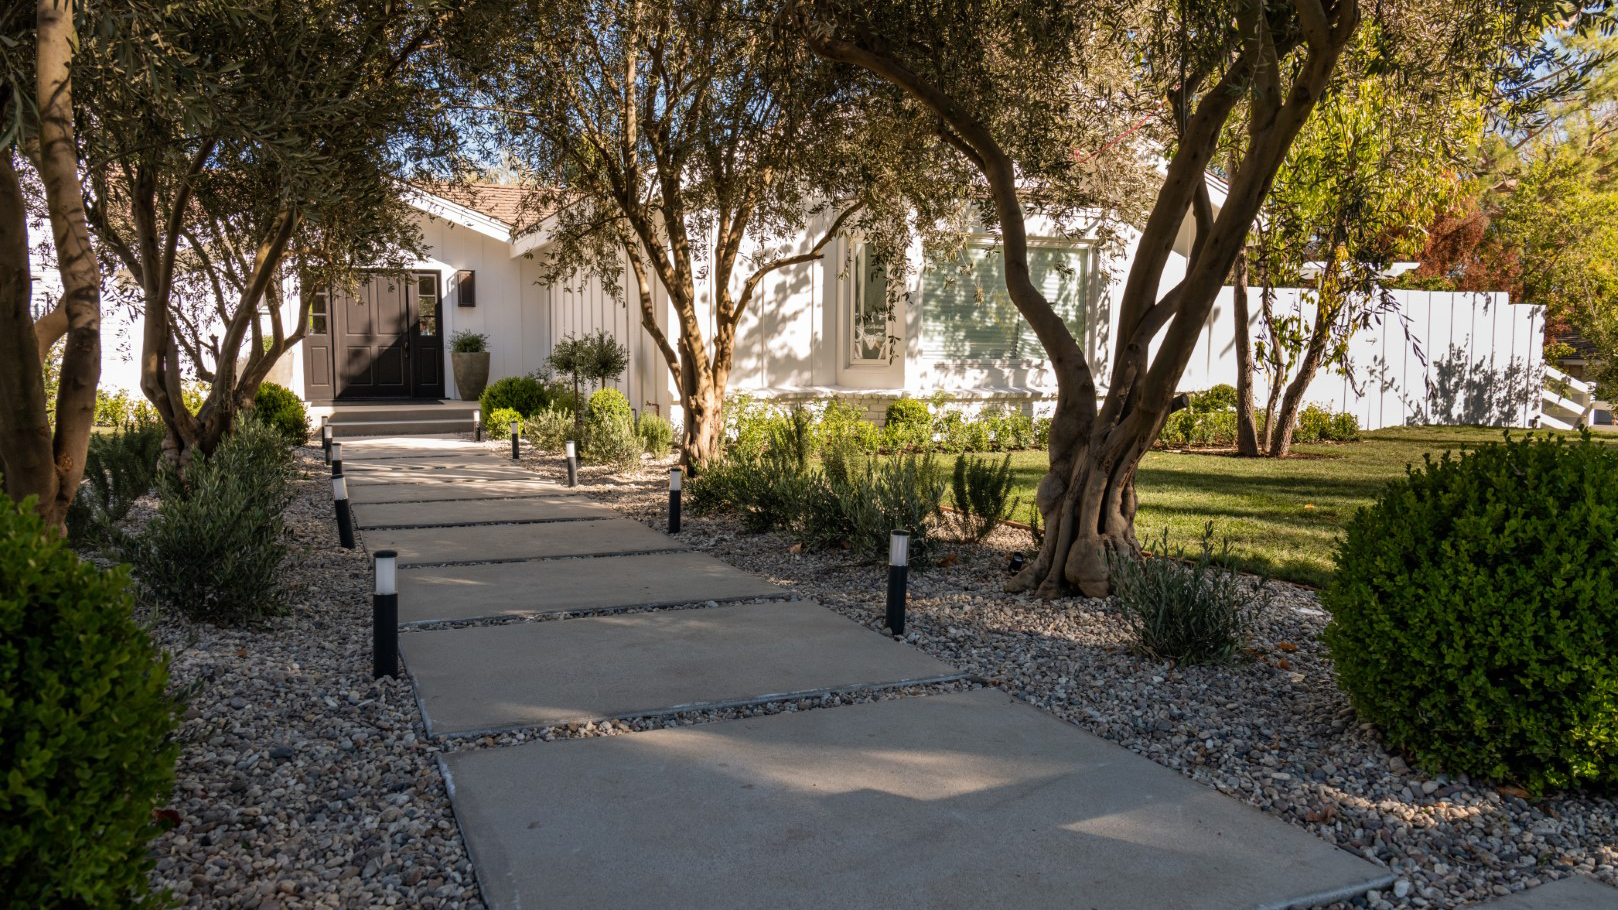 The front yard after renovations by Drew and Jonathan Scott with Kris Jenner and Kim Kardashian, as seen on Celebrity IOU.